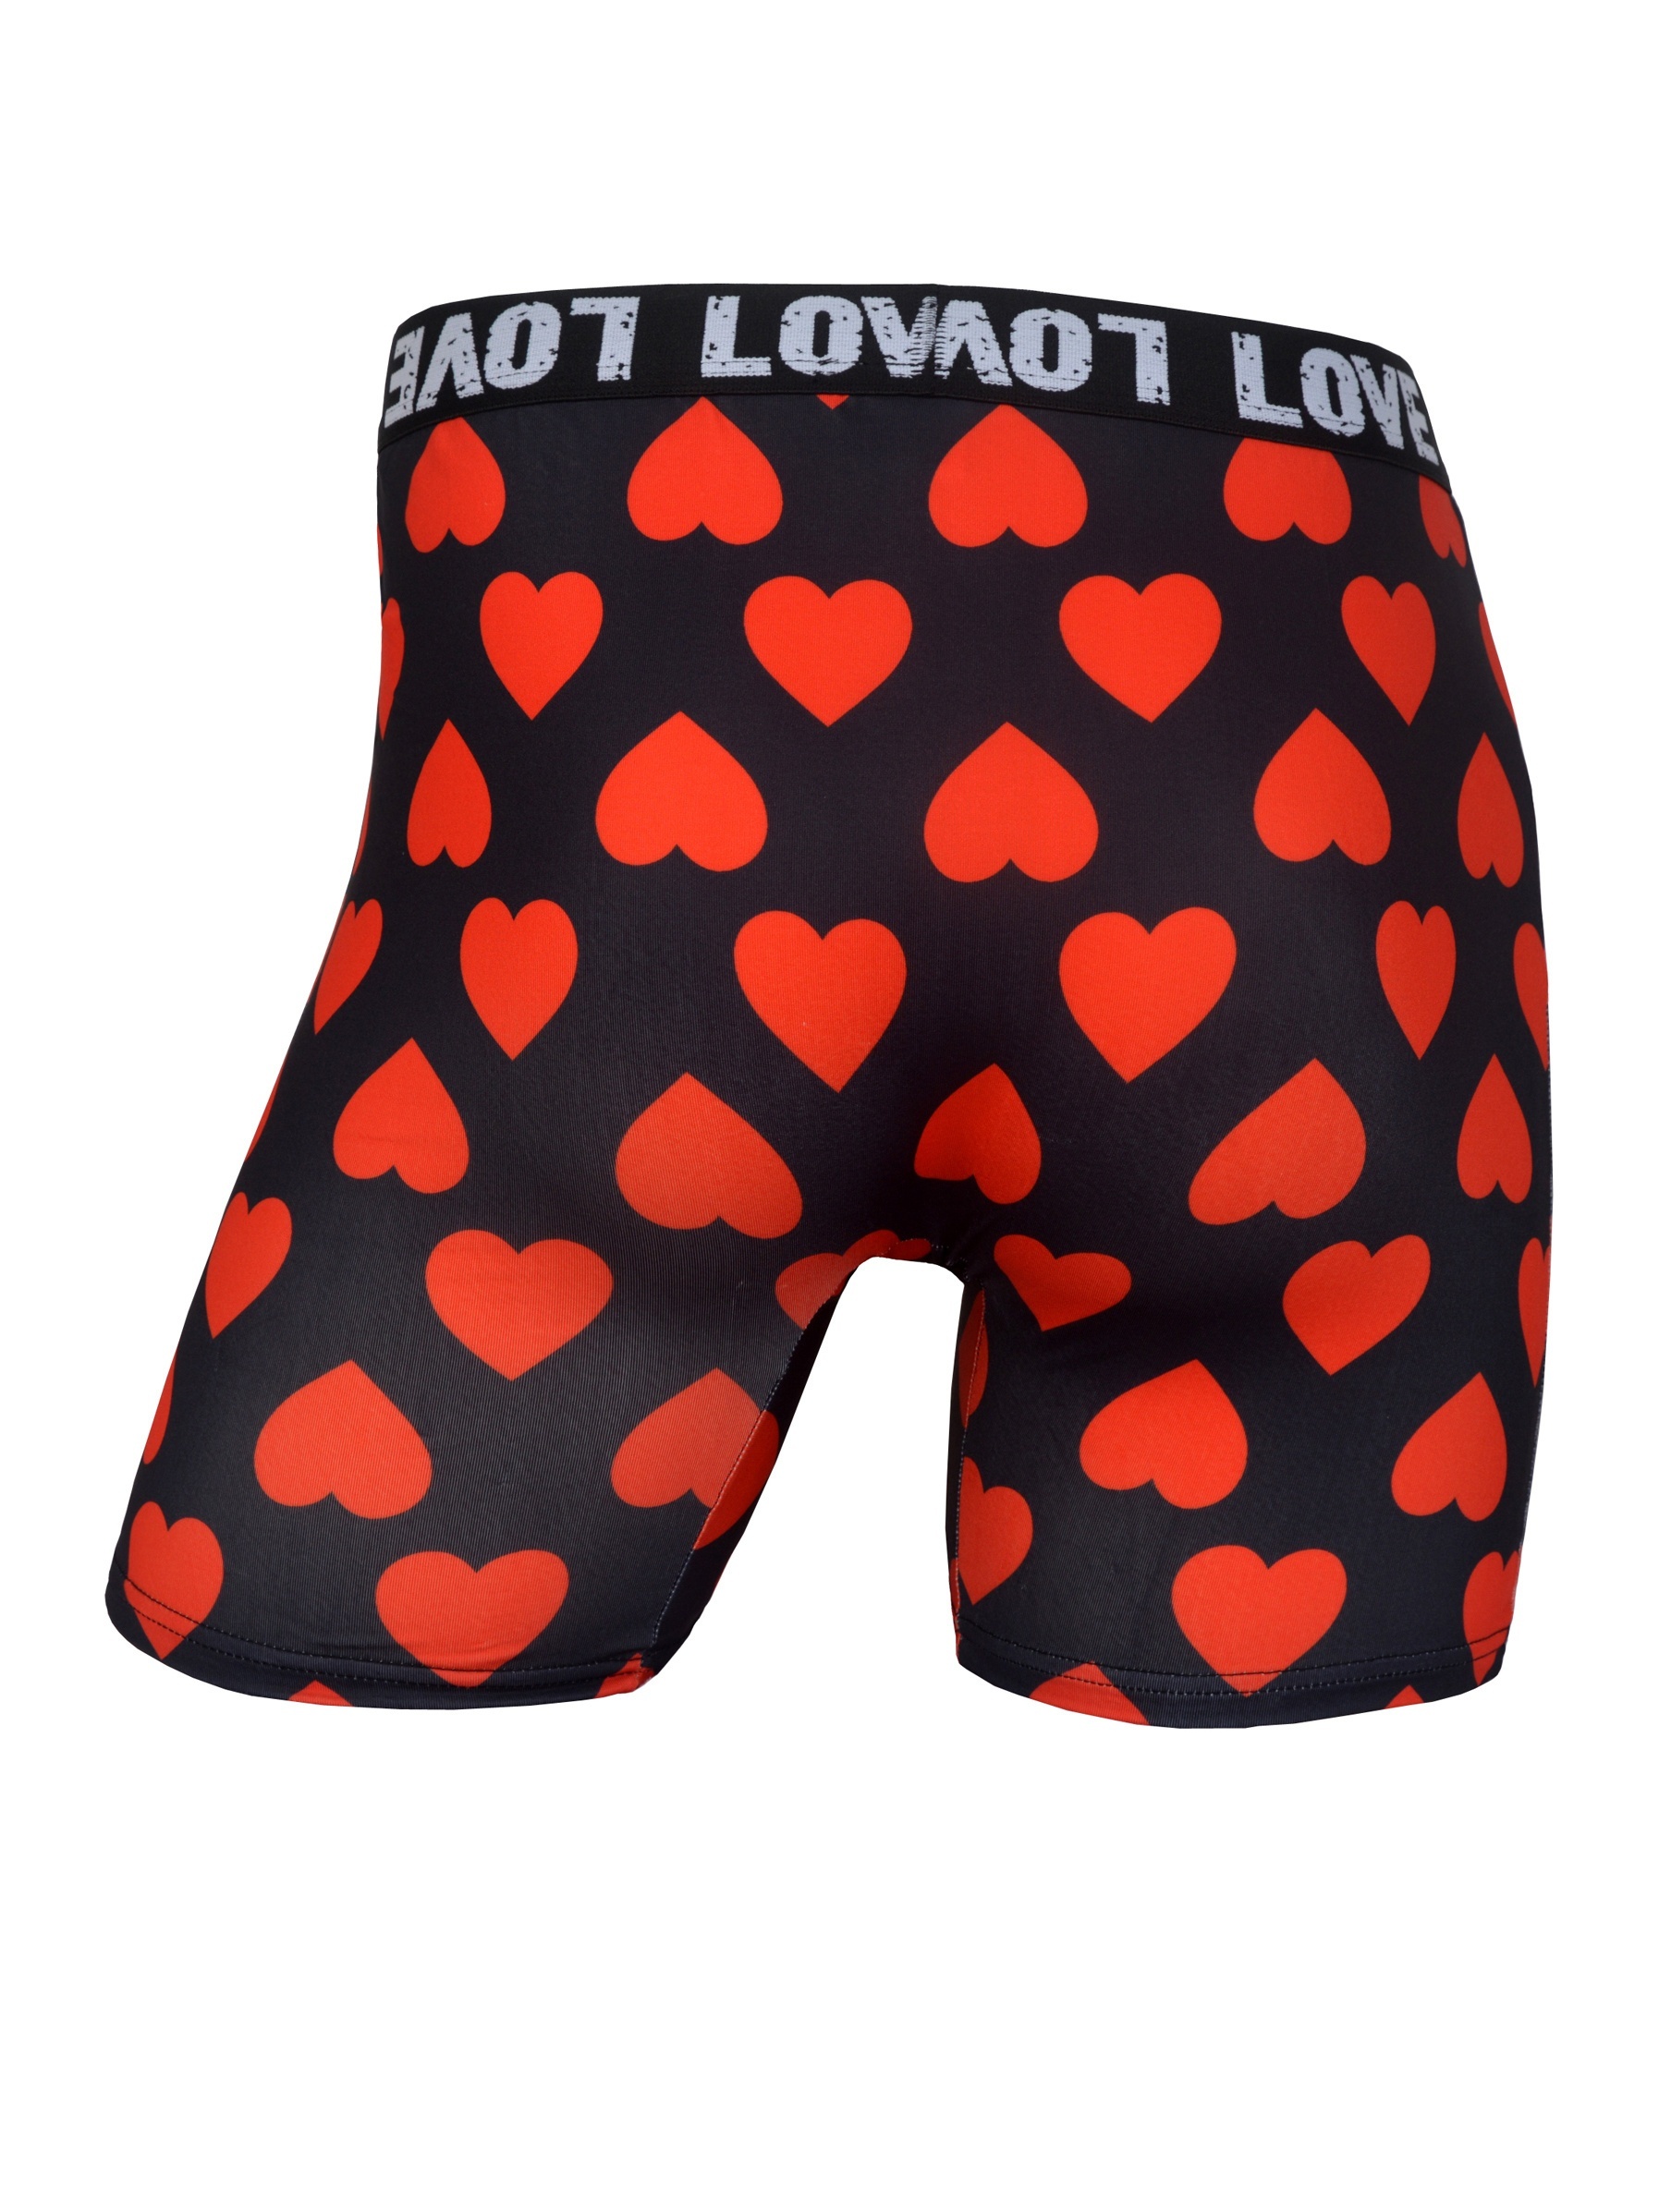 Men's Underwear, Heart Print Fashion Breathable Comfy High Stretch Boxer  Briefs Shorts, Valentine's Day Gifts